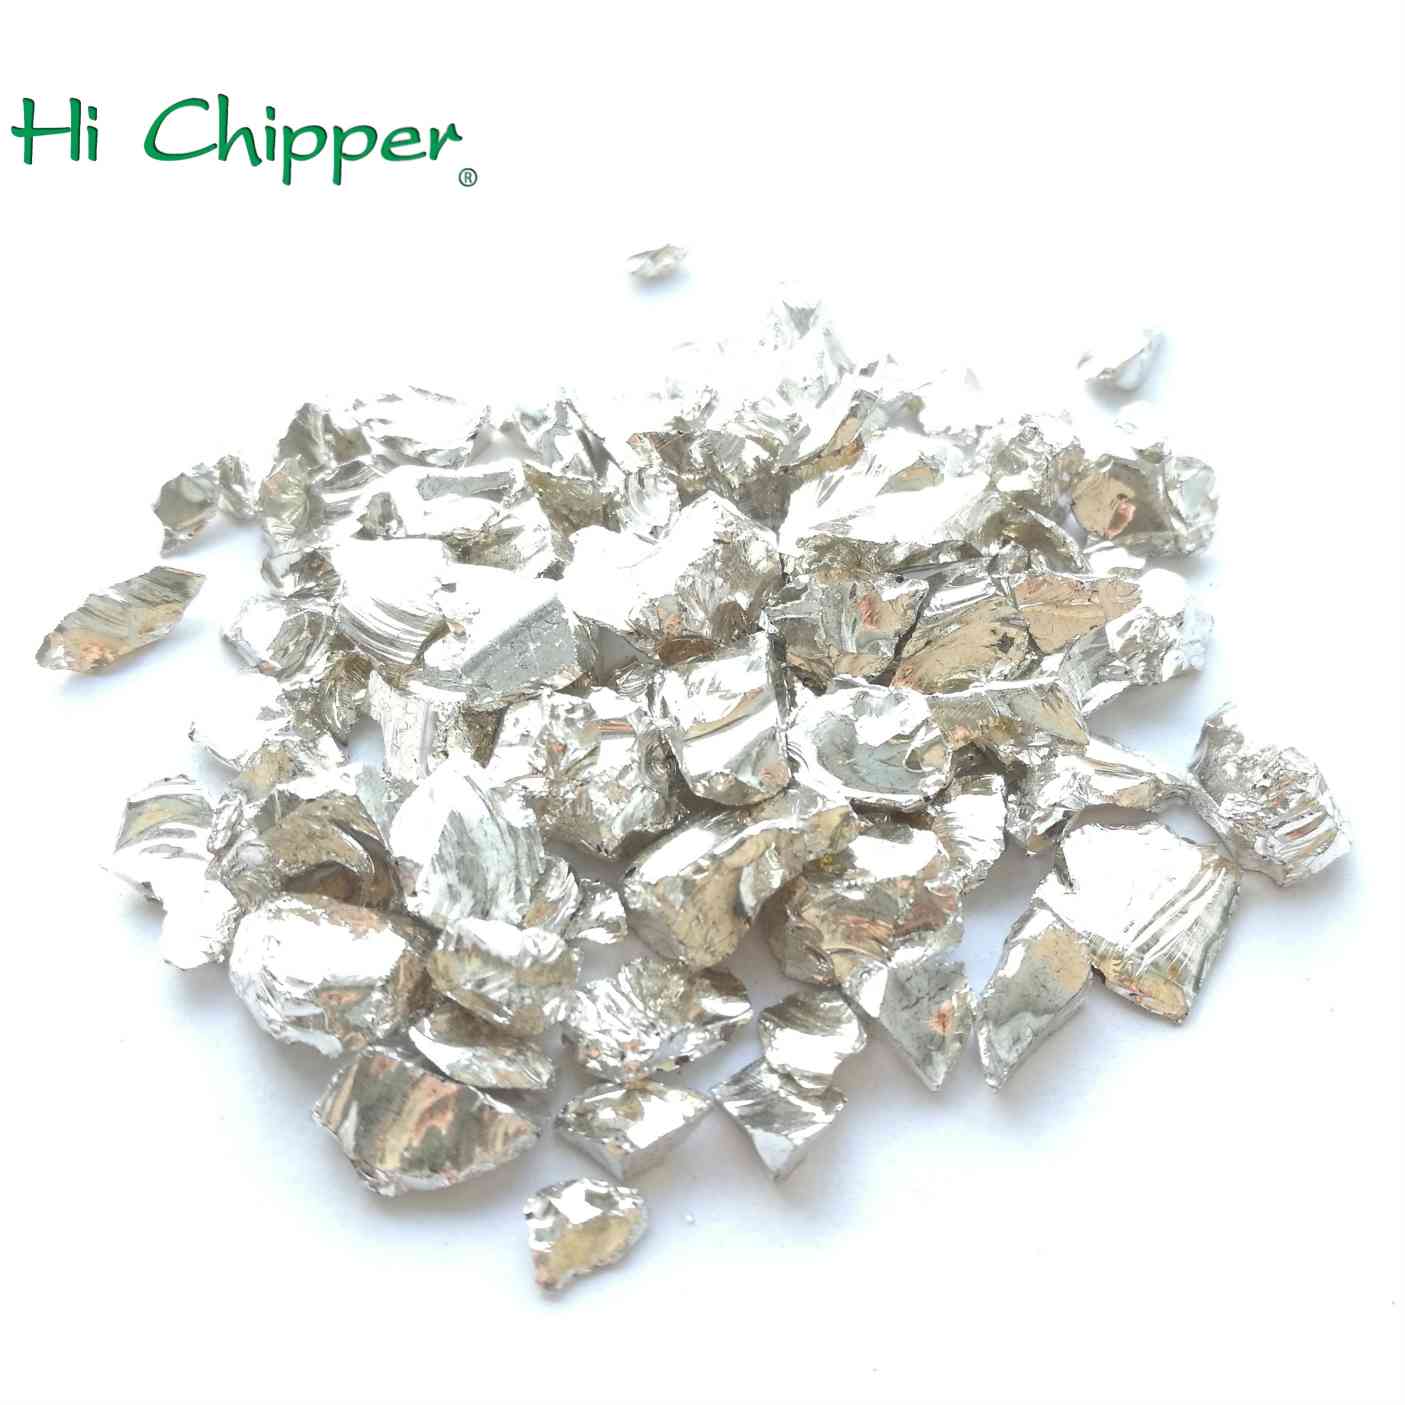 Hologram Silver Glitter Glass Used in Construction Decoration